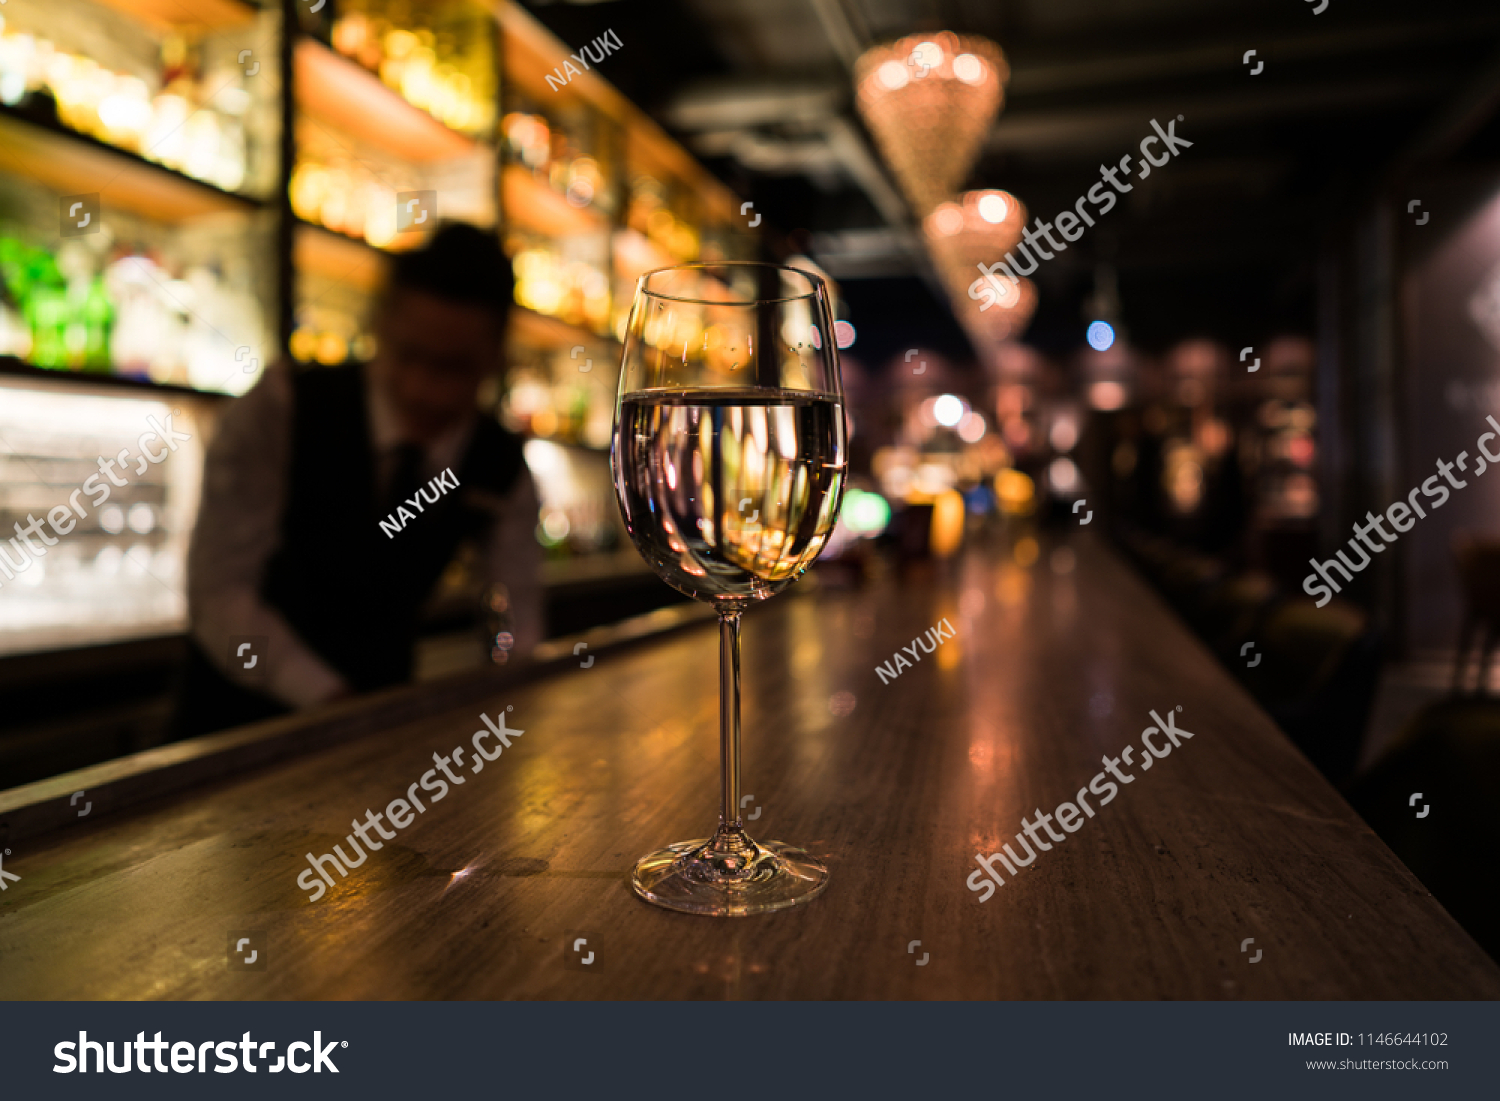 A glass of white wine on the bar counter #1146644102